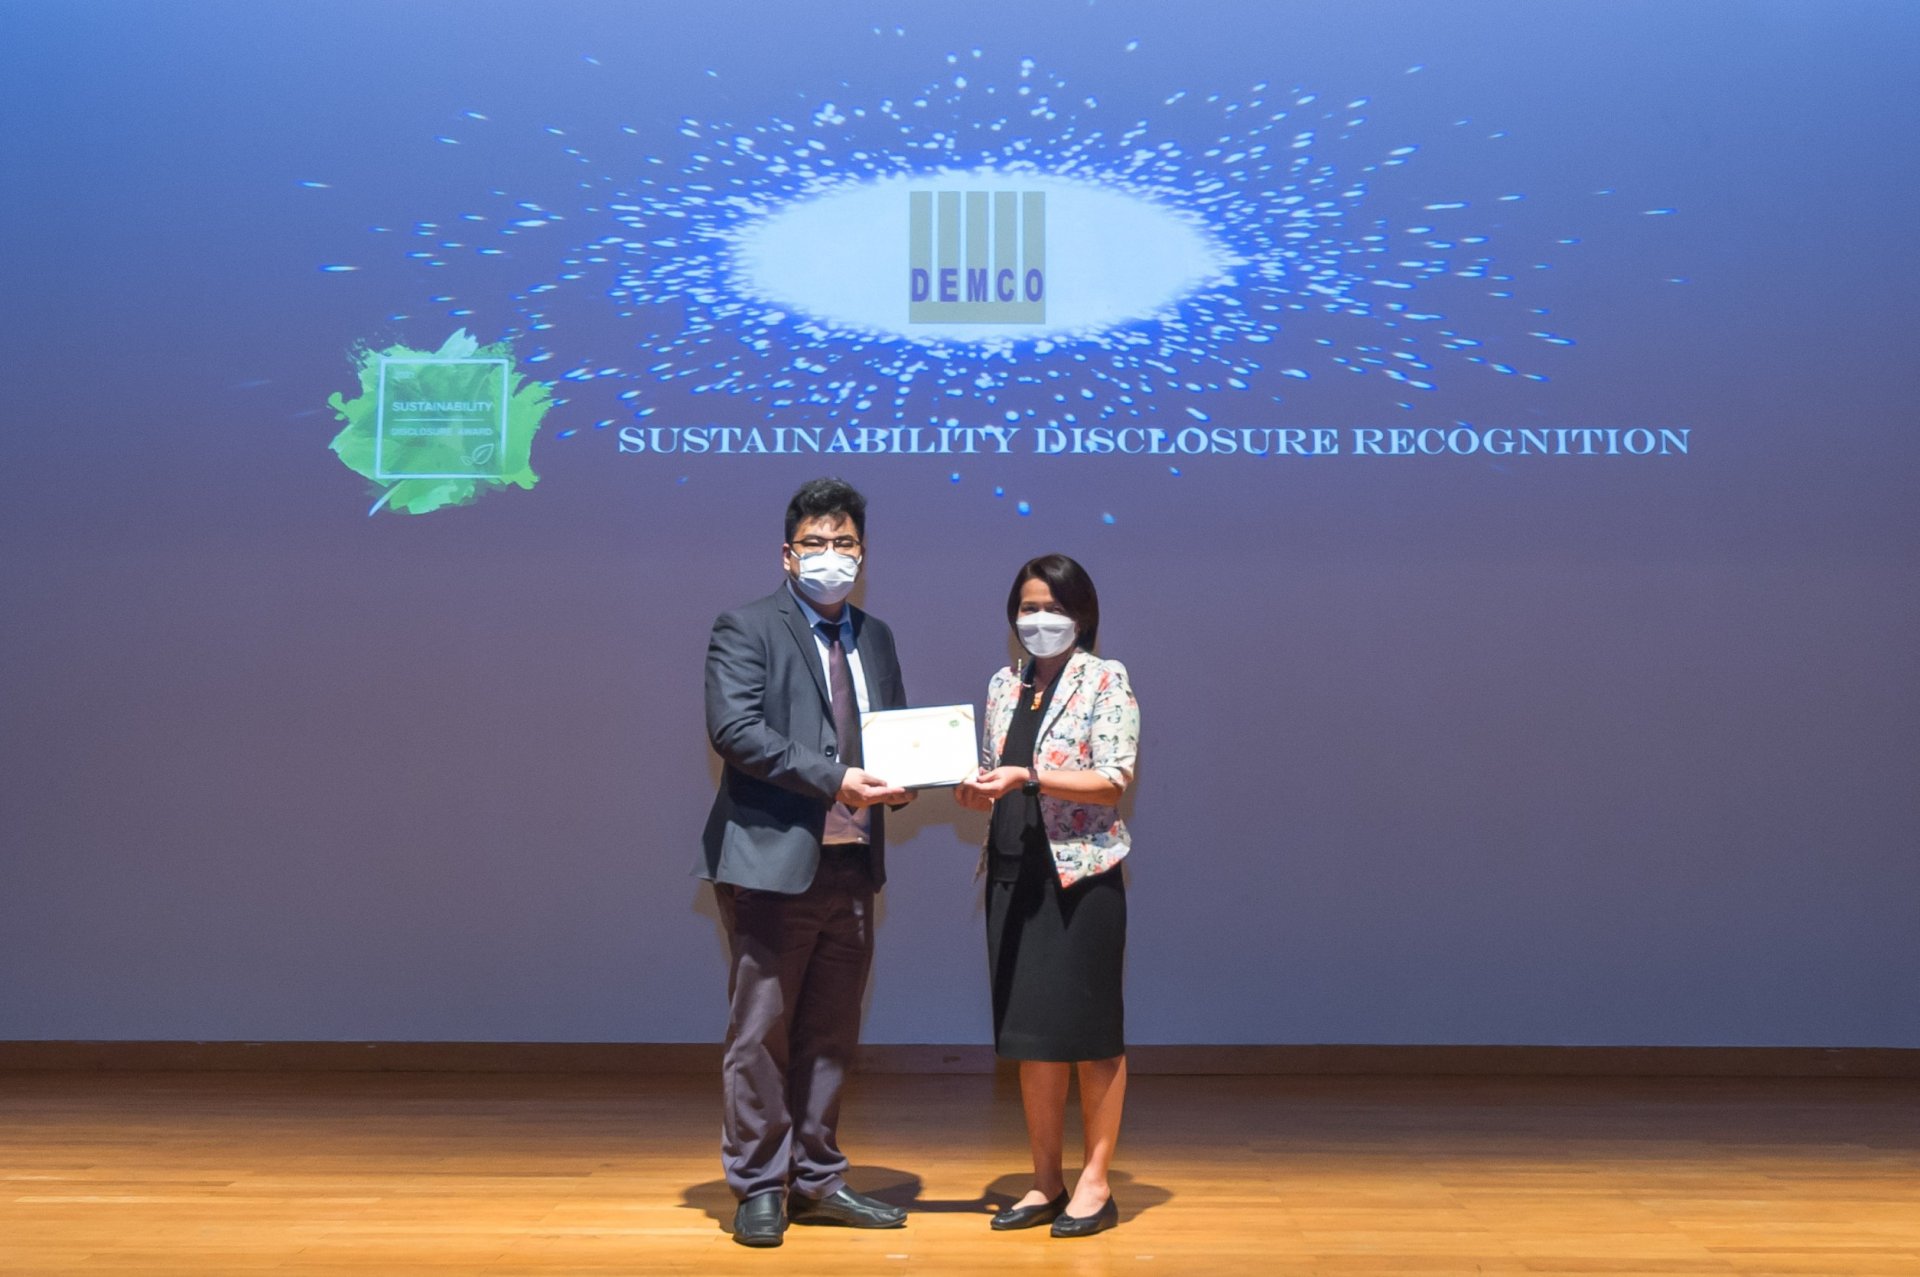 DEMCO รับรางวัล Sustainability Disclosure Recognition